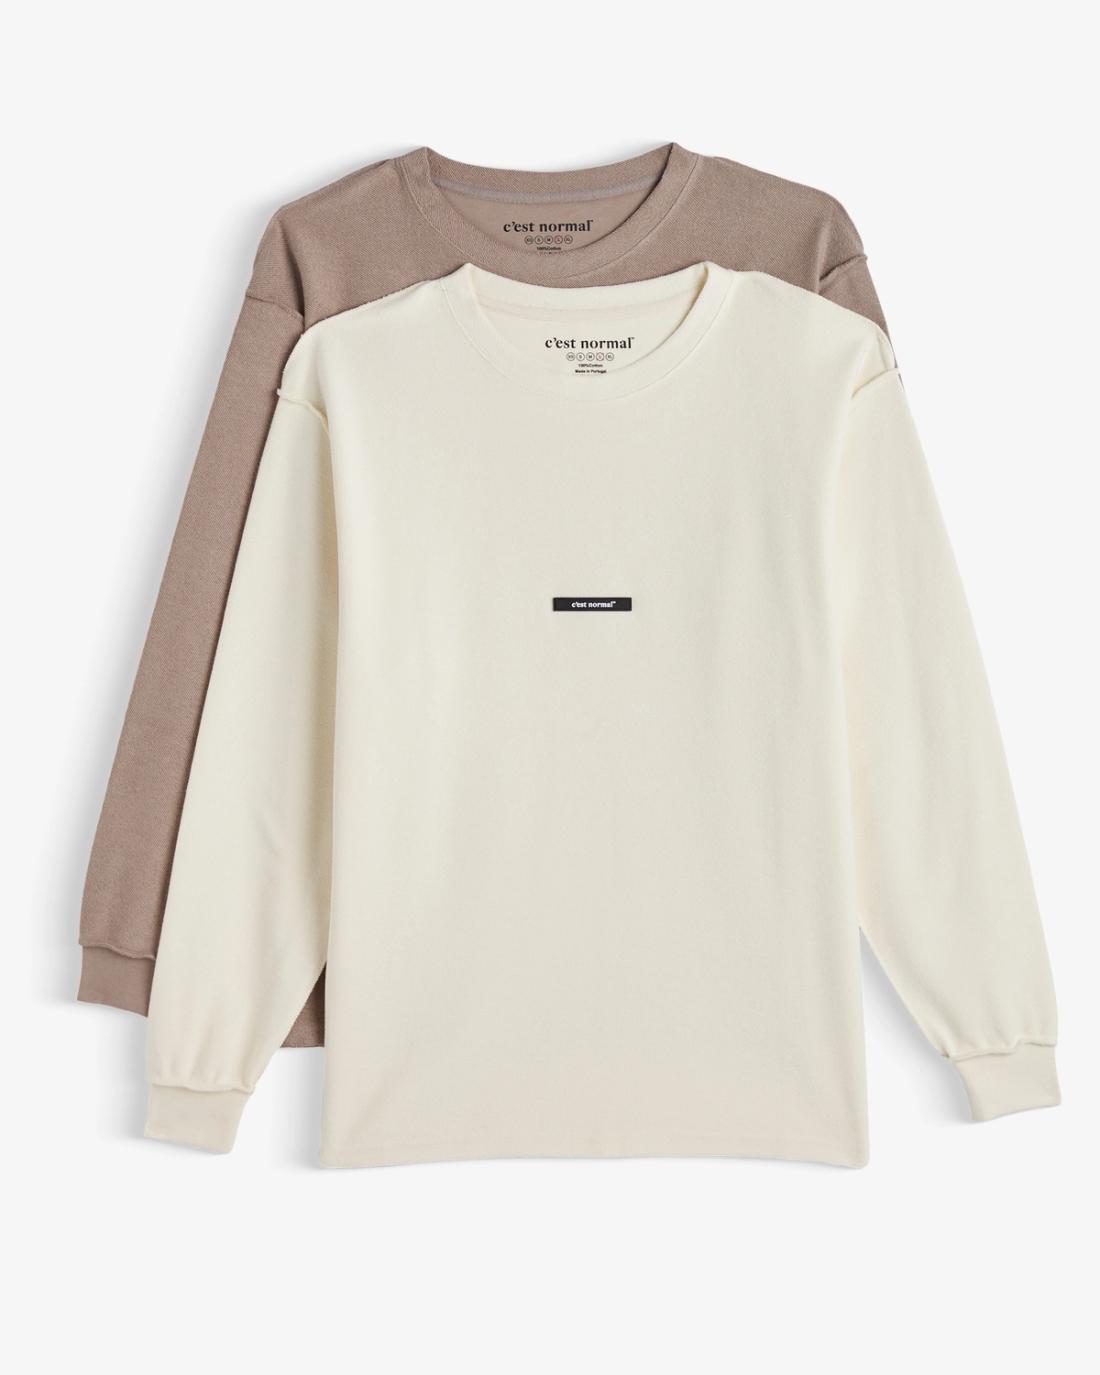 The Inside-Out Long Sleeve T